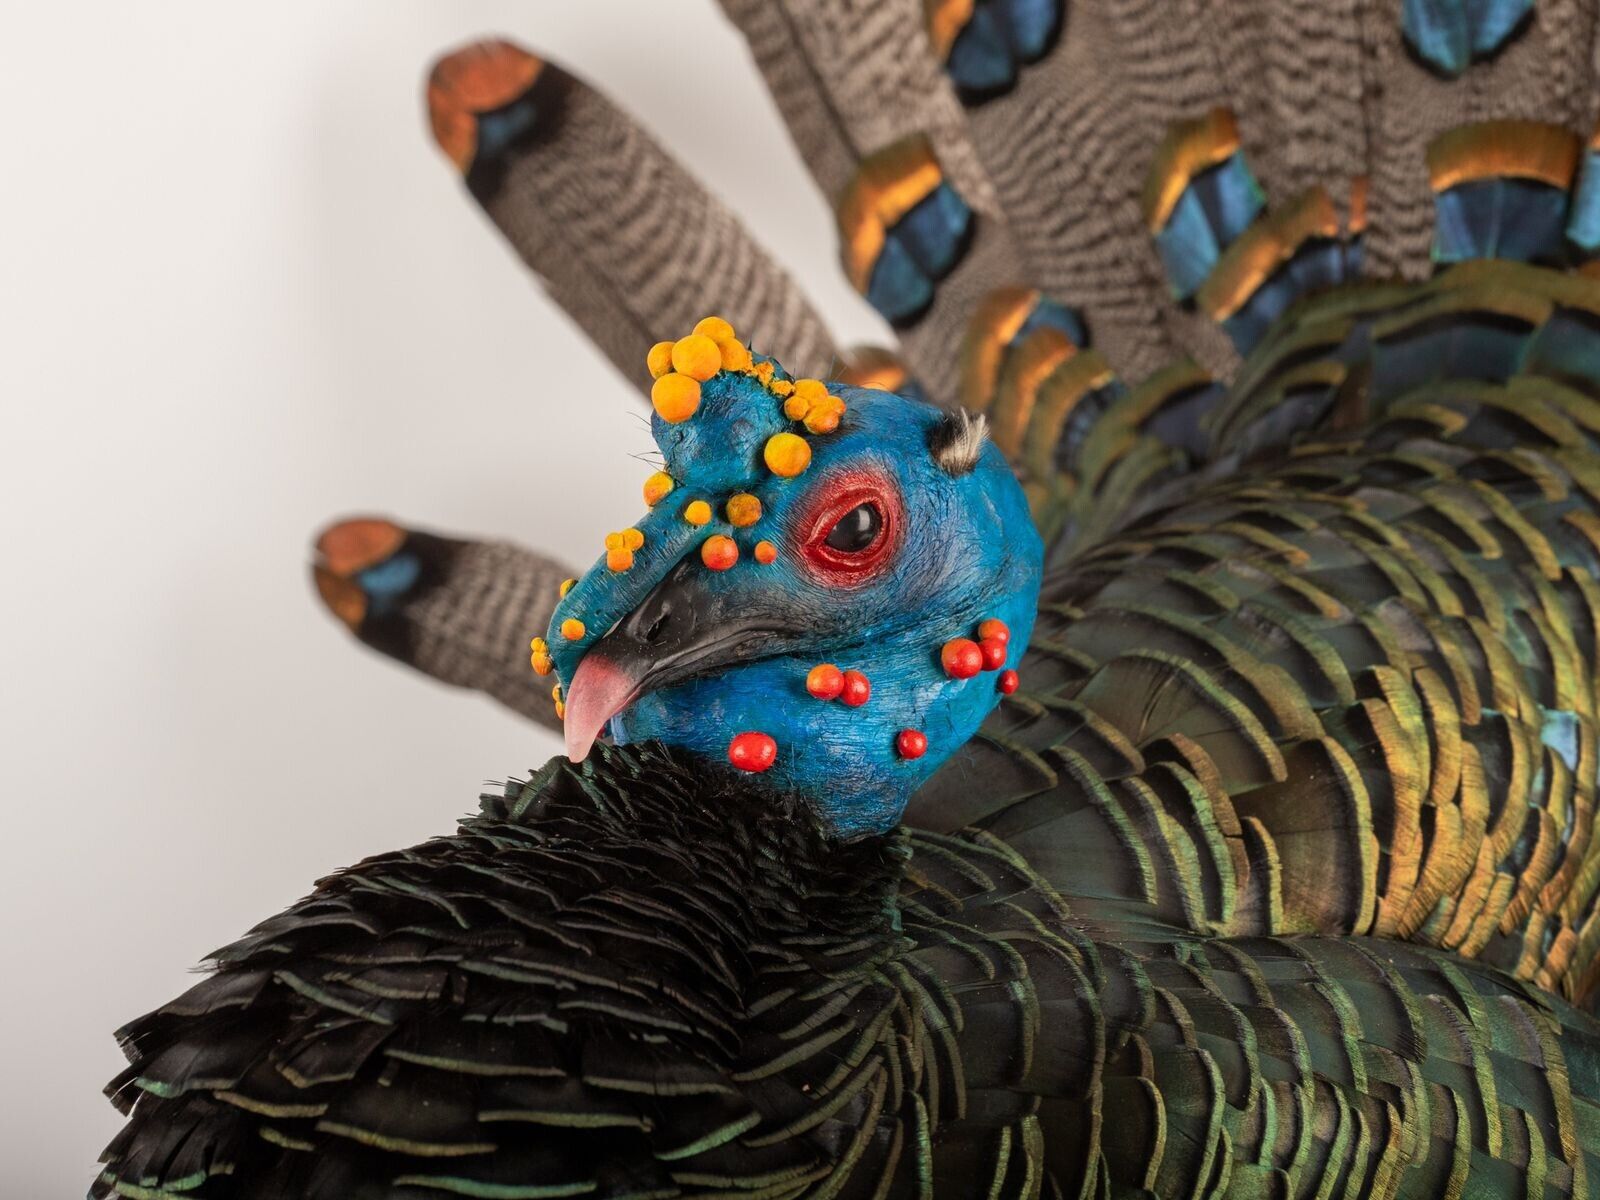 Brand New Oscellated Turkey taxidermy mount Detachable Tail